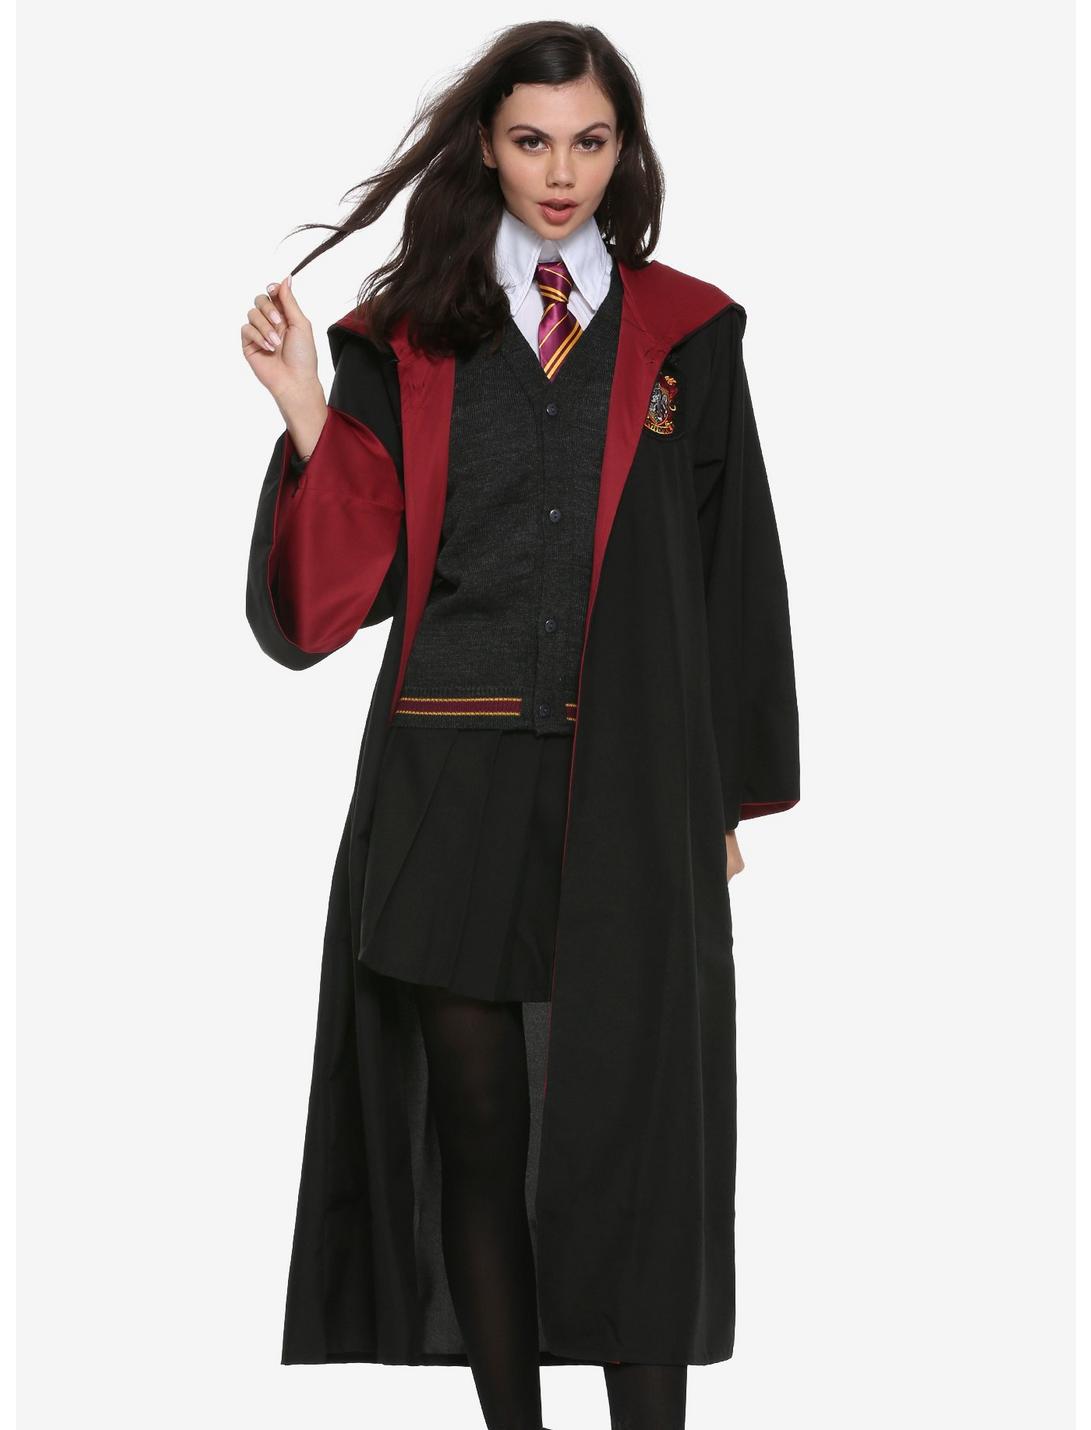 To deal with Sheer waste away Harry Potter Hermione Gryffindor Deluxe Costume Set | Hot Topic